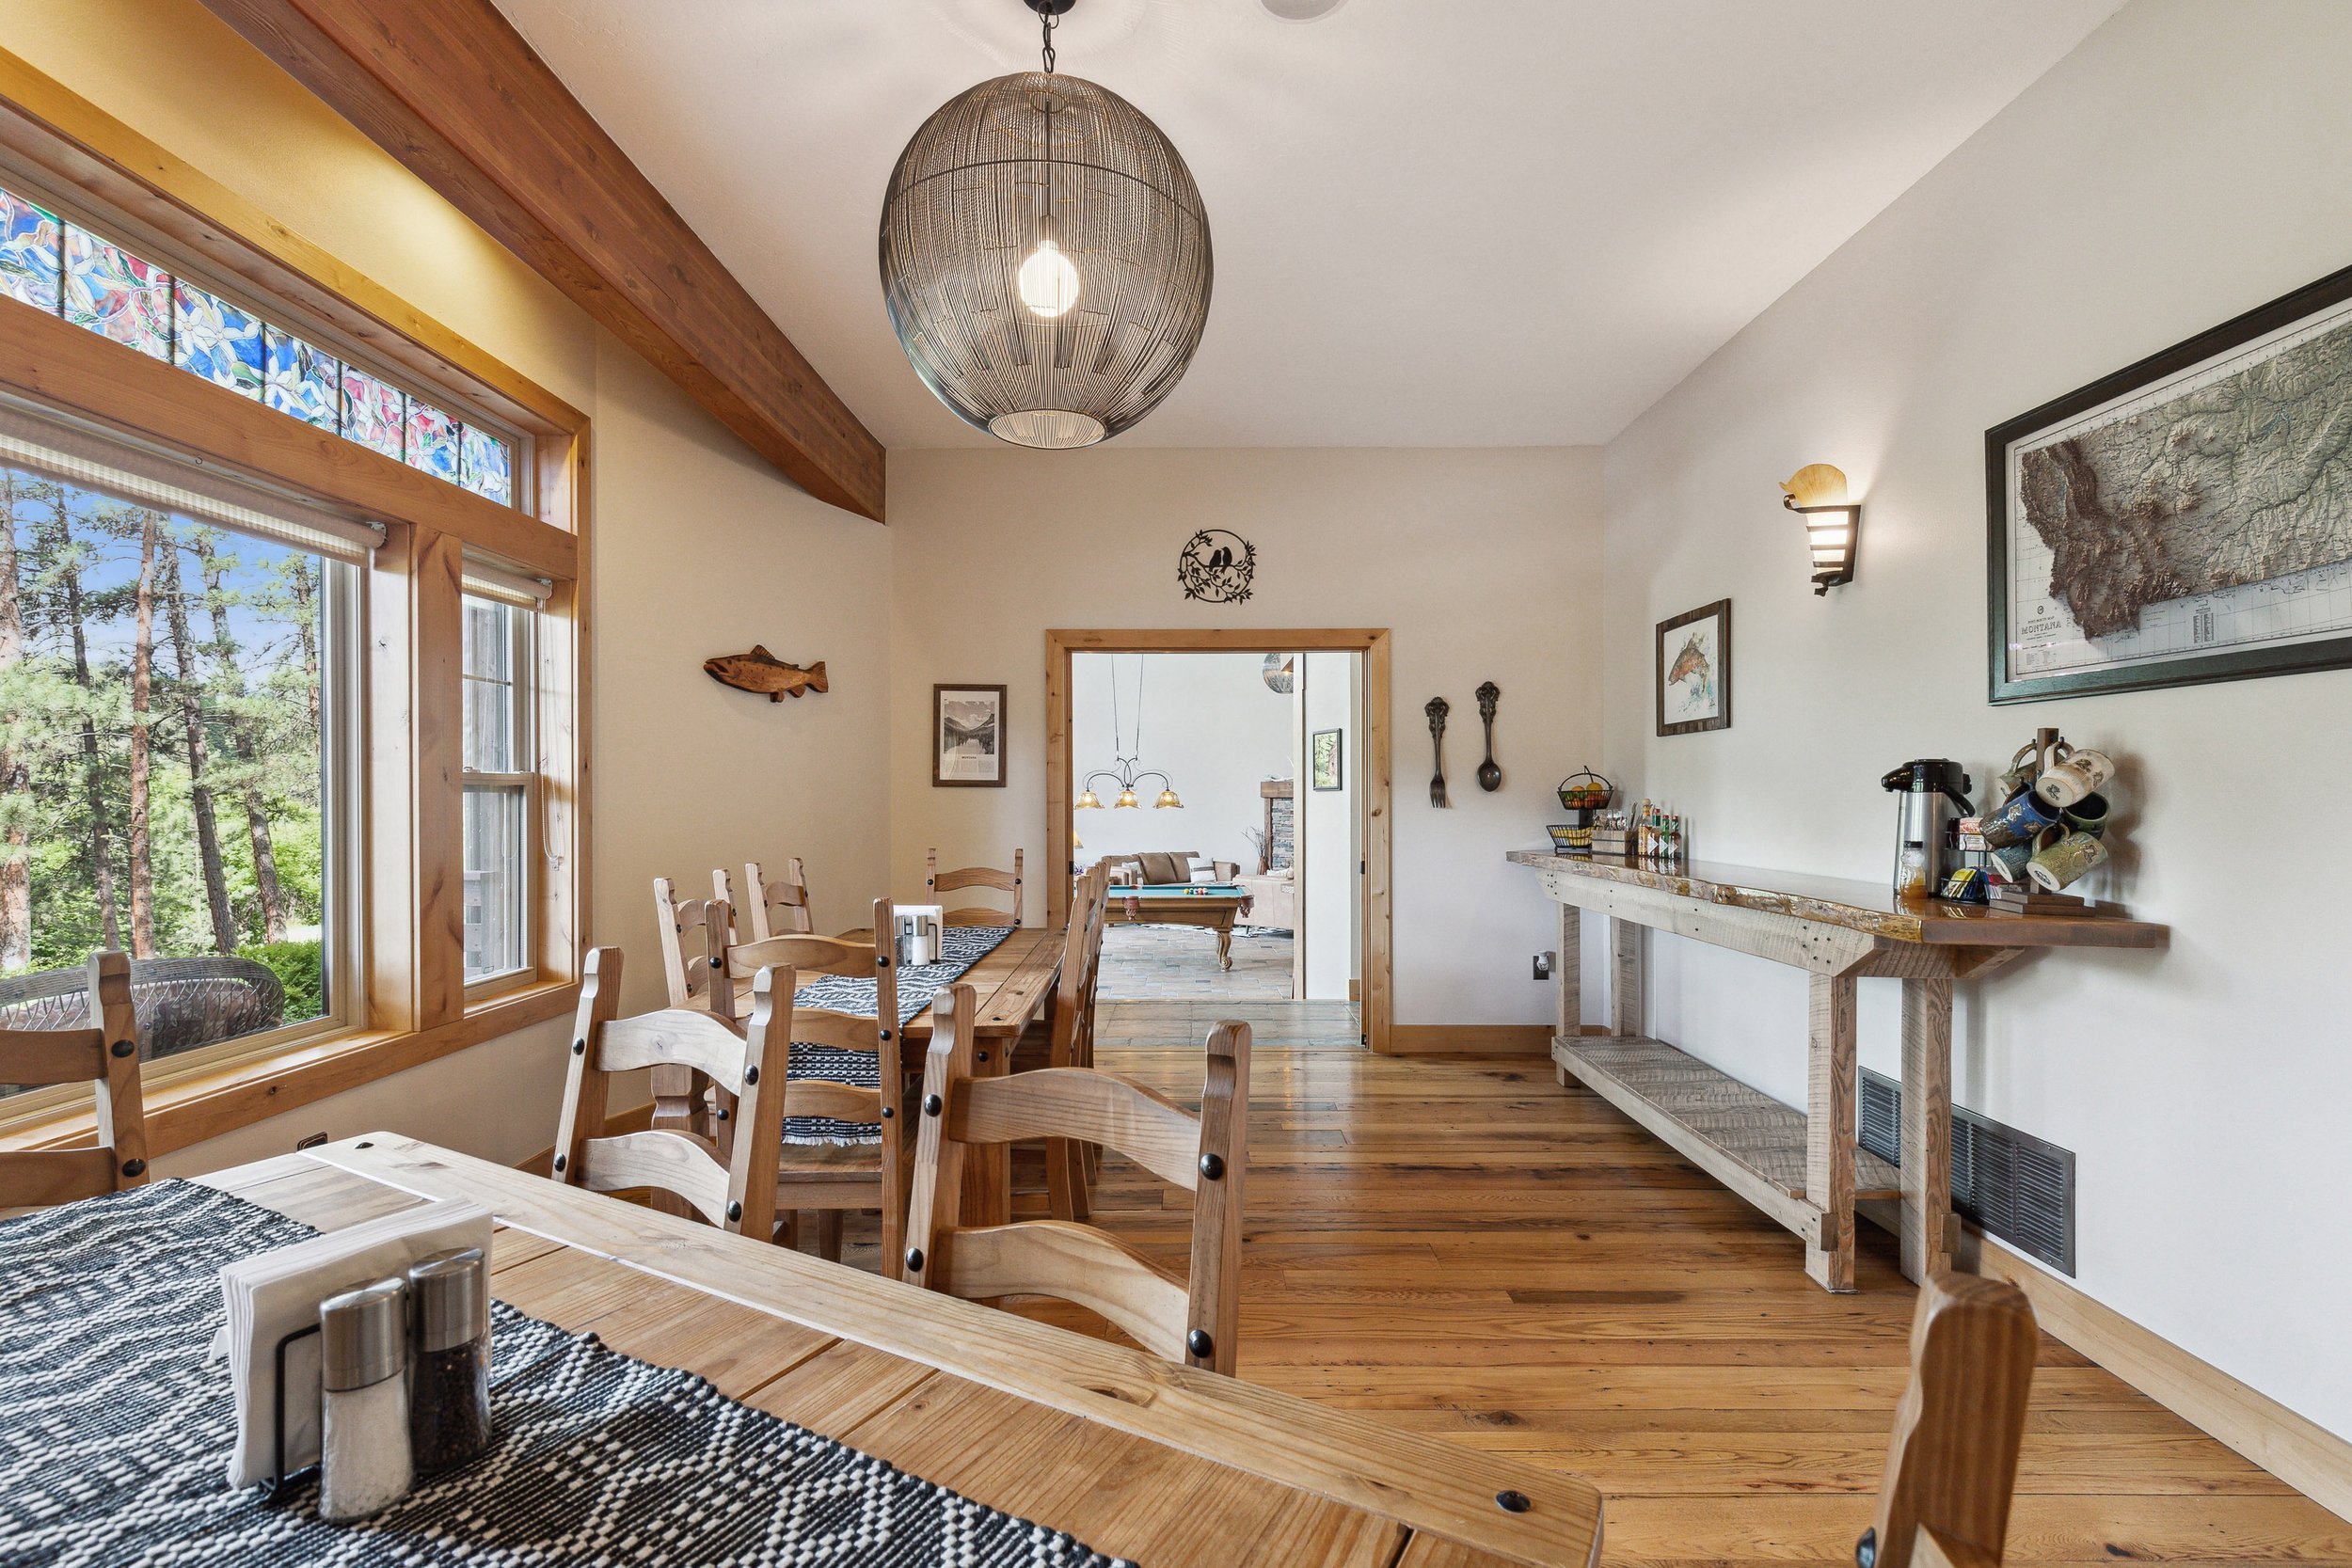 The Lodge at Forest Grove | Missoula Montana Fly Fishing Lodge | Dining room where guests enjoy all inclusive breakfast and dinner from professional chef.jpeg